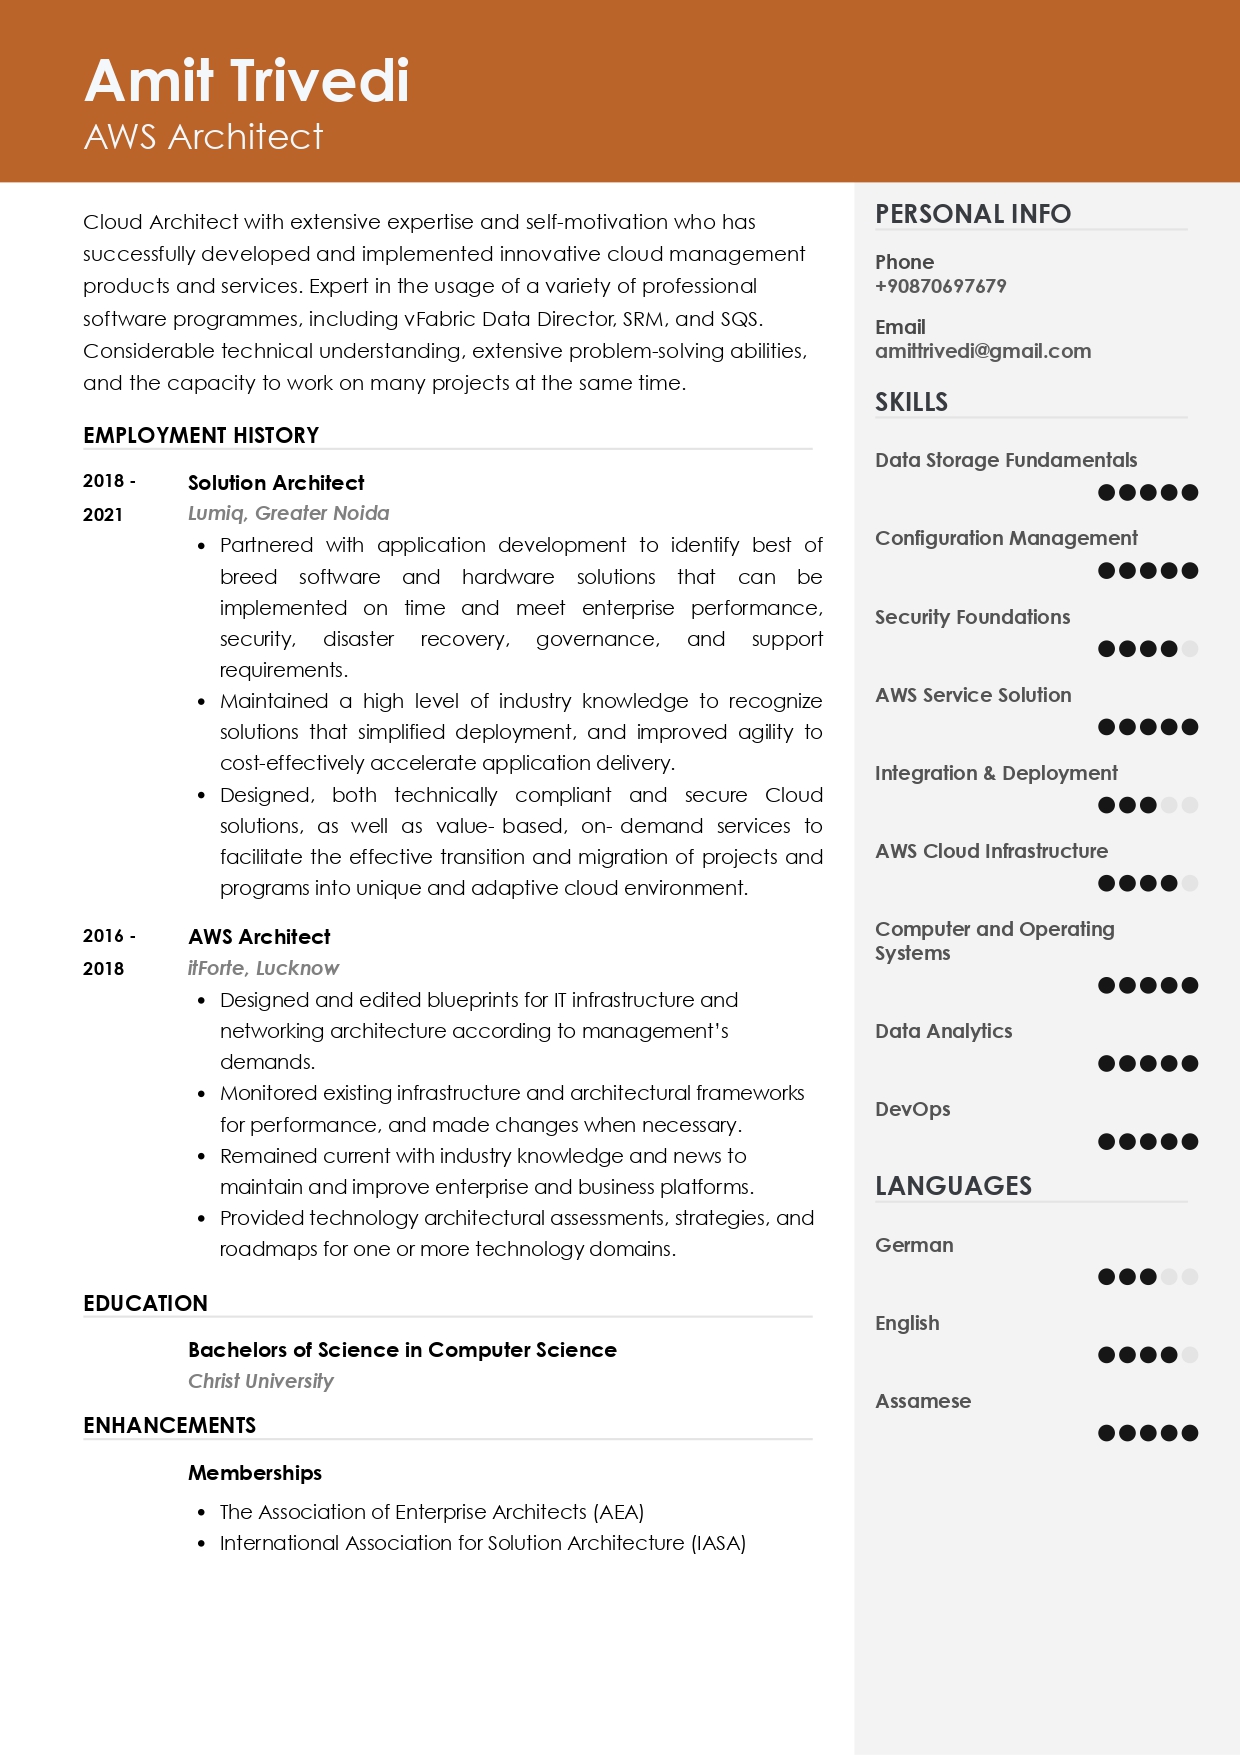 Sample Resume of AWS Architect | Free Resume Templates & Samples on Resumod.co